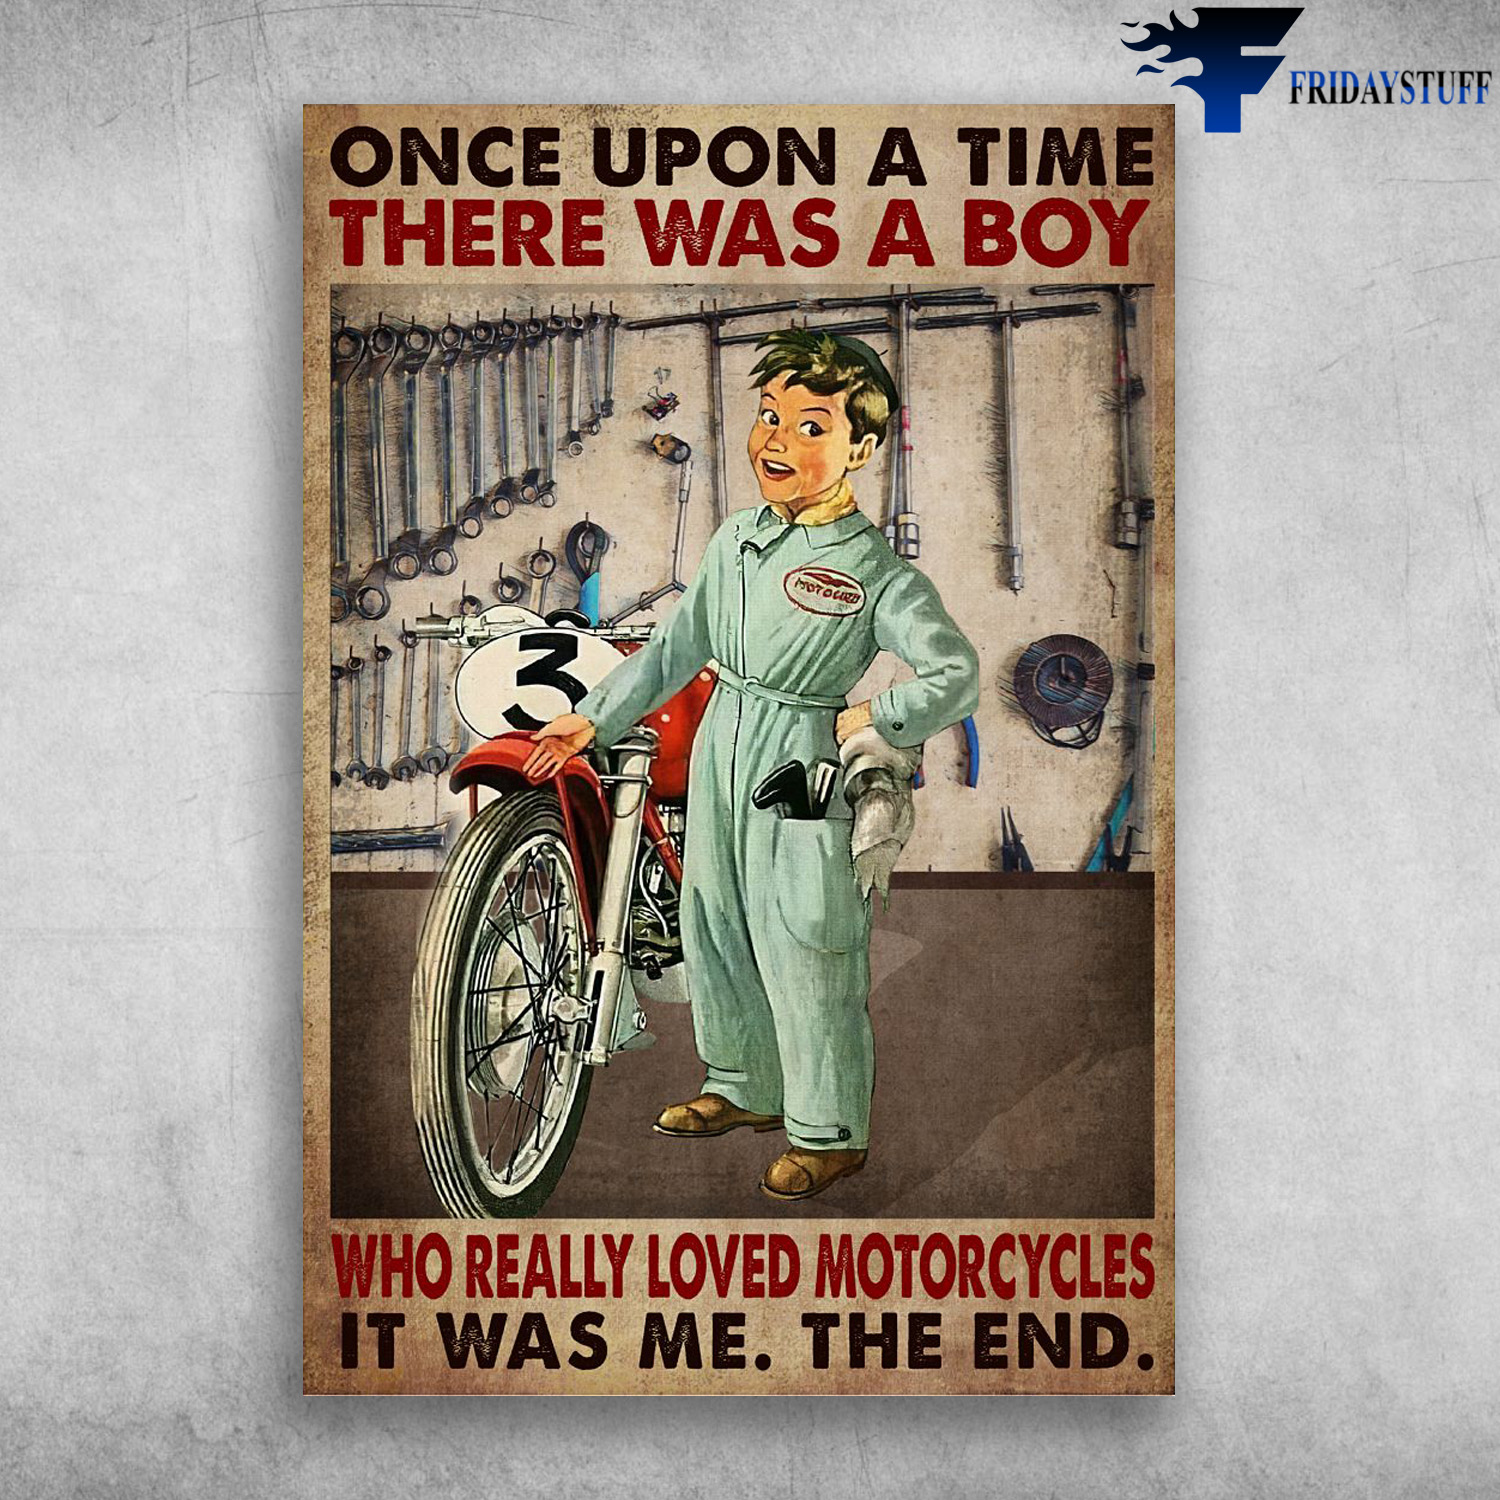 Boy Loves Motorcycle - Once Upon A Time, There Was A Boy, Who Really Loved Motorcycles, It Was Me, The End